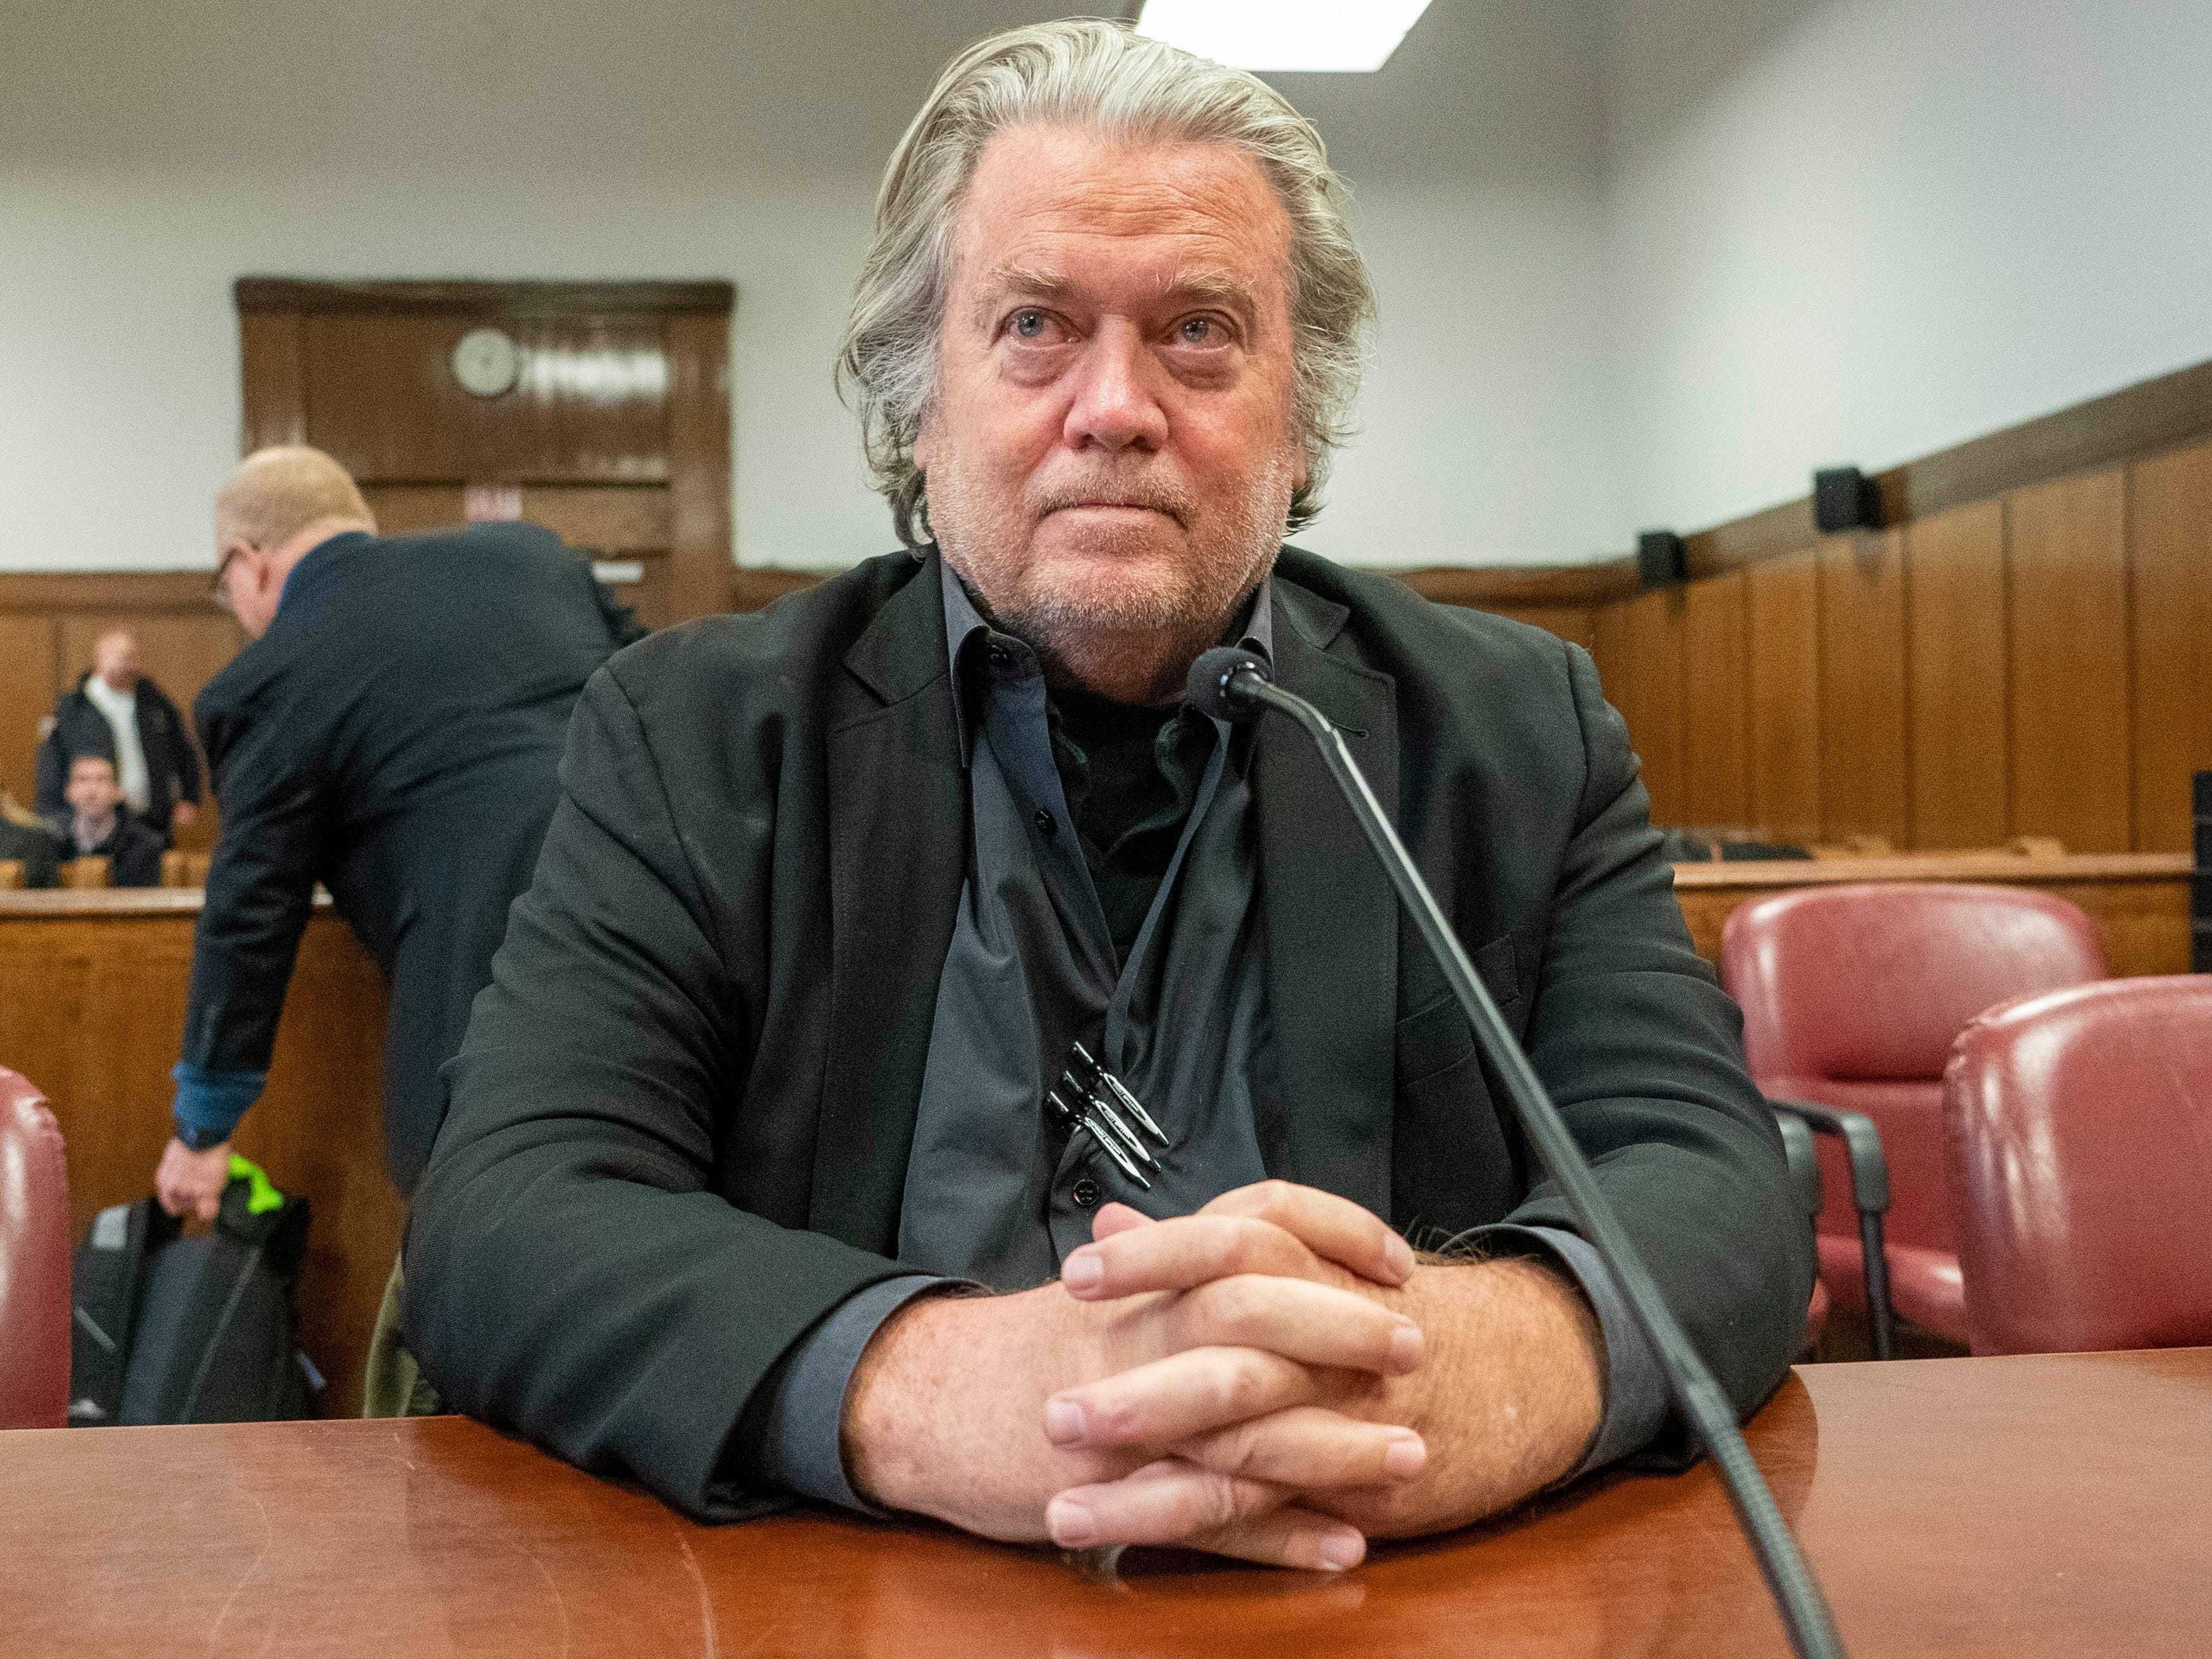 Steve Bannon scheduled to serve four-month sentence for contempt